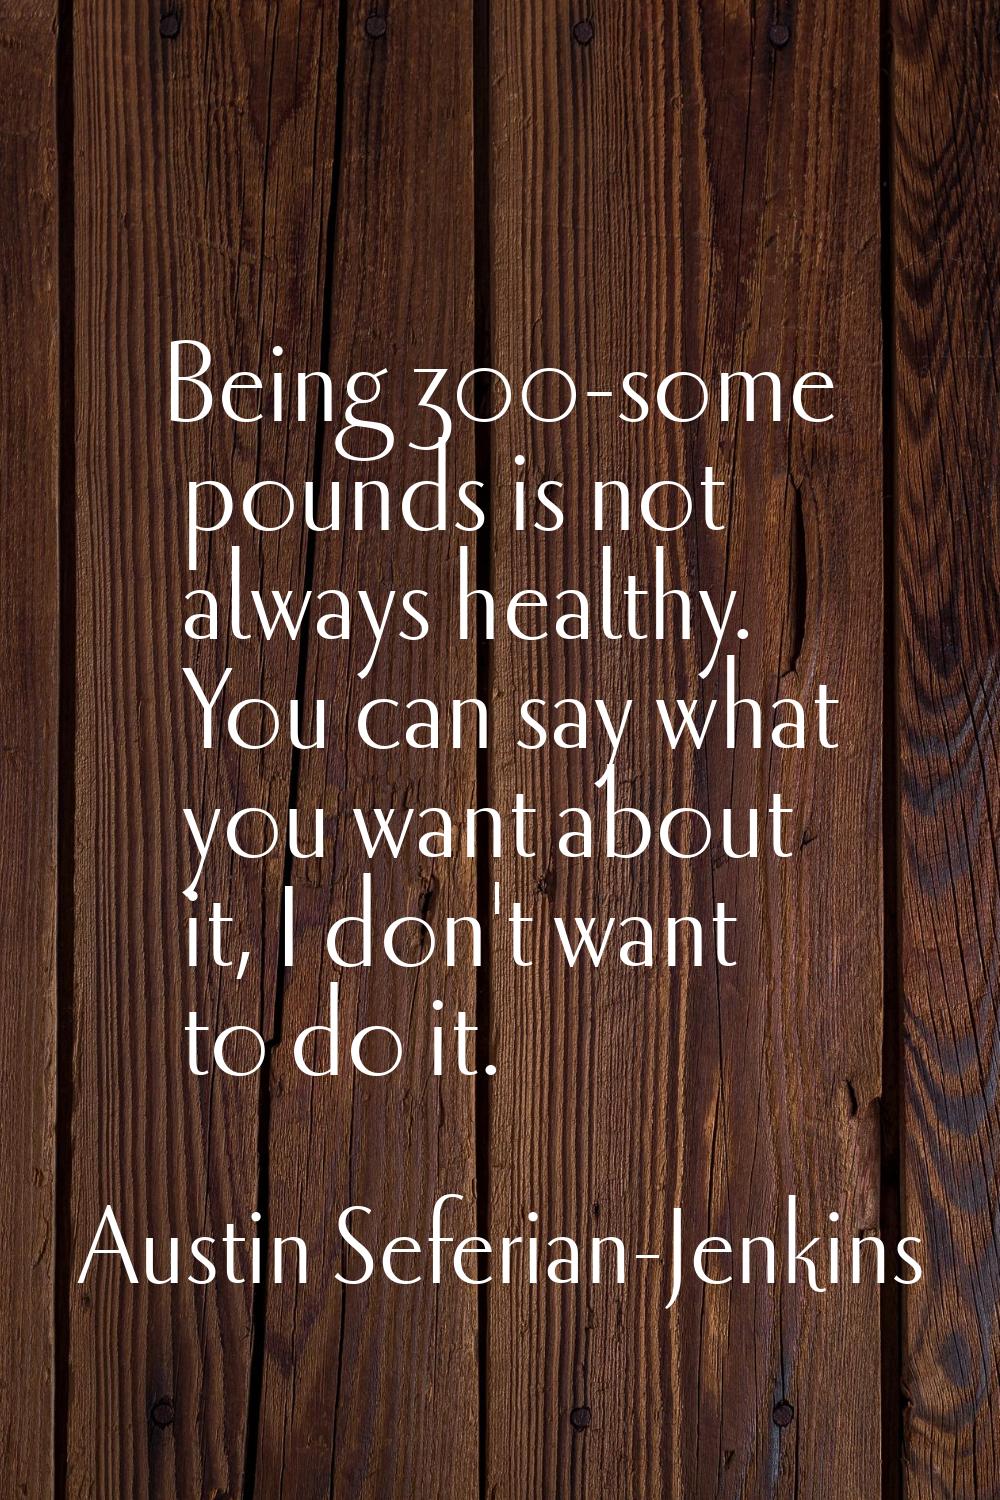 Being 300-some pounds is not always healthy. You can say what you want about it, I don't want to do